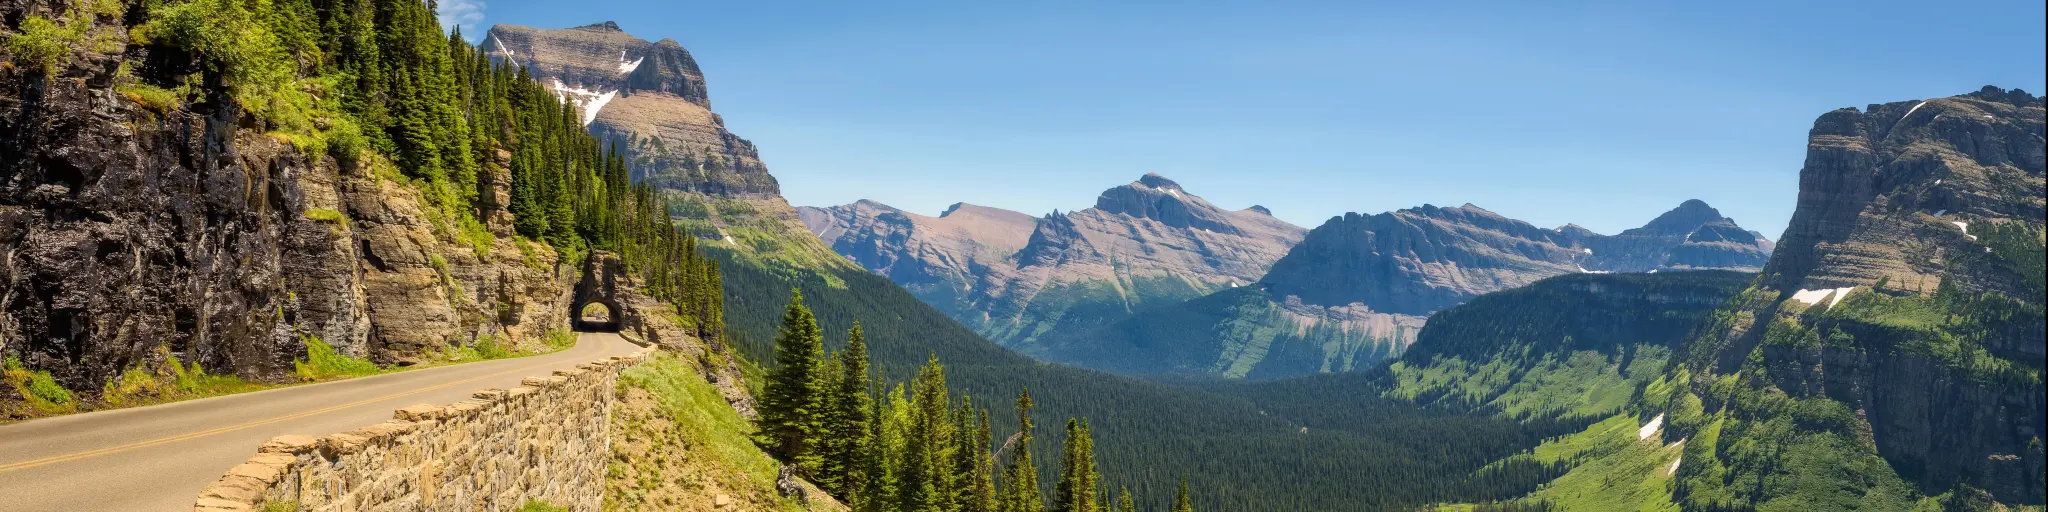 Going to the Sun Road, Montana, USA with a beautiful panoramic view of Logan Pass in Glacier National Park on a sunny day.